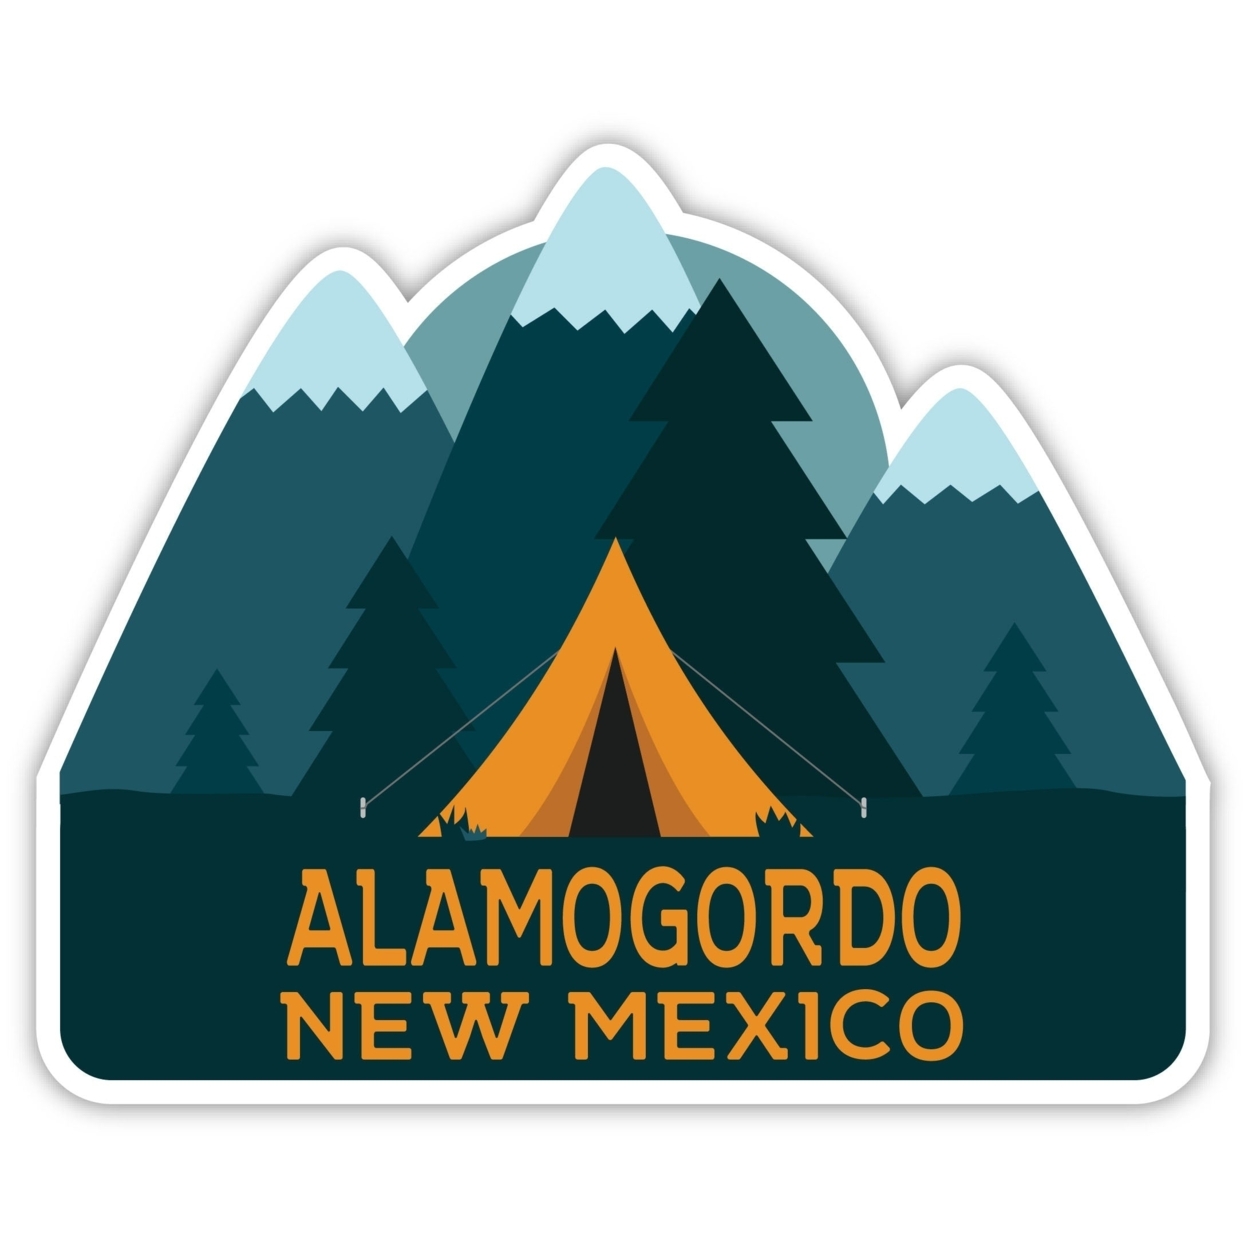 Alamogordo New Mexico Souvenir Decorative Stickers (Choose Theme And Size) - 4-Pack, 8-Inch, Tent